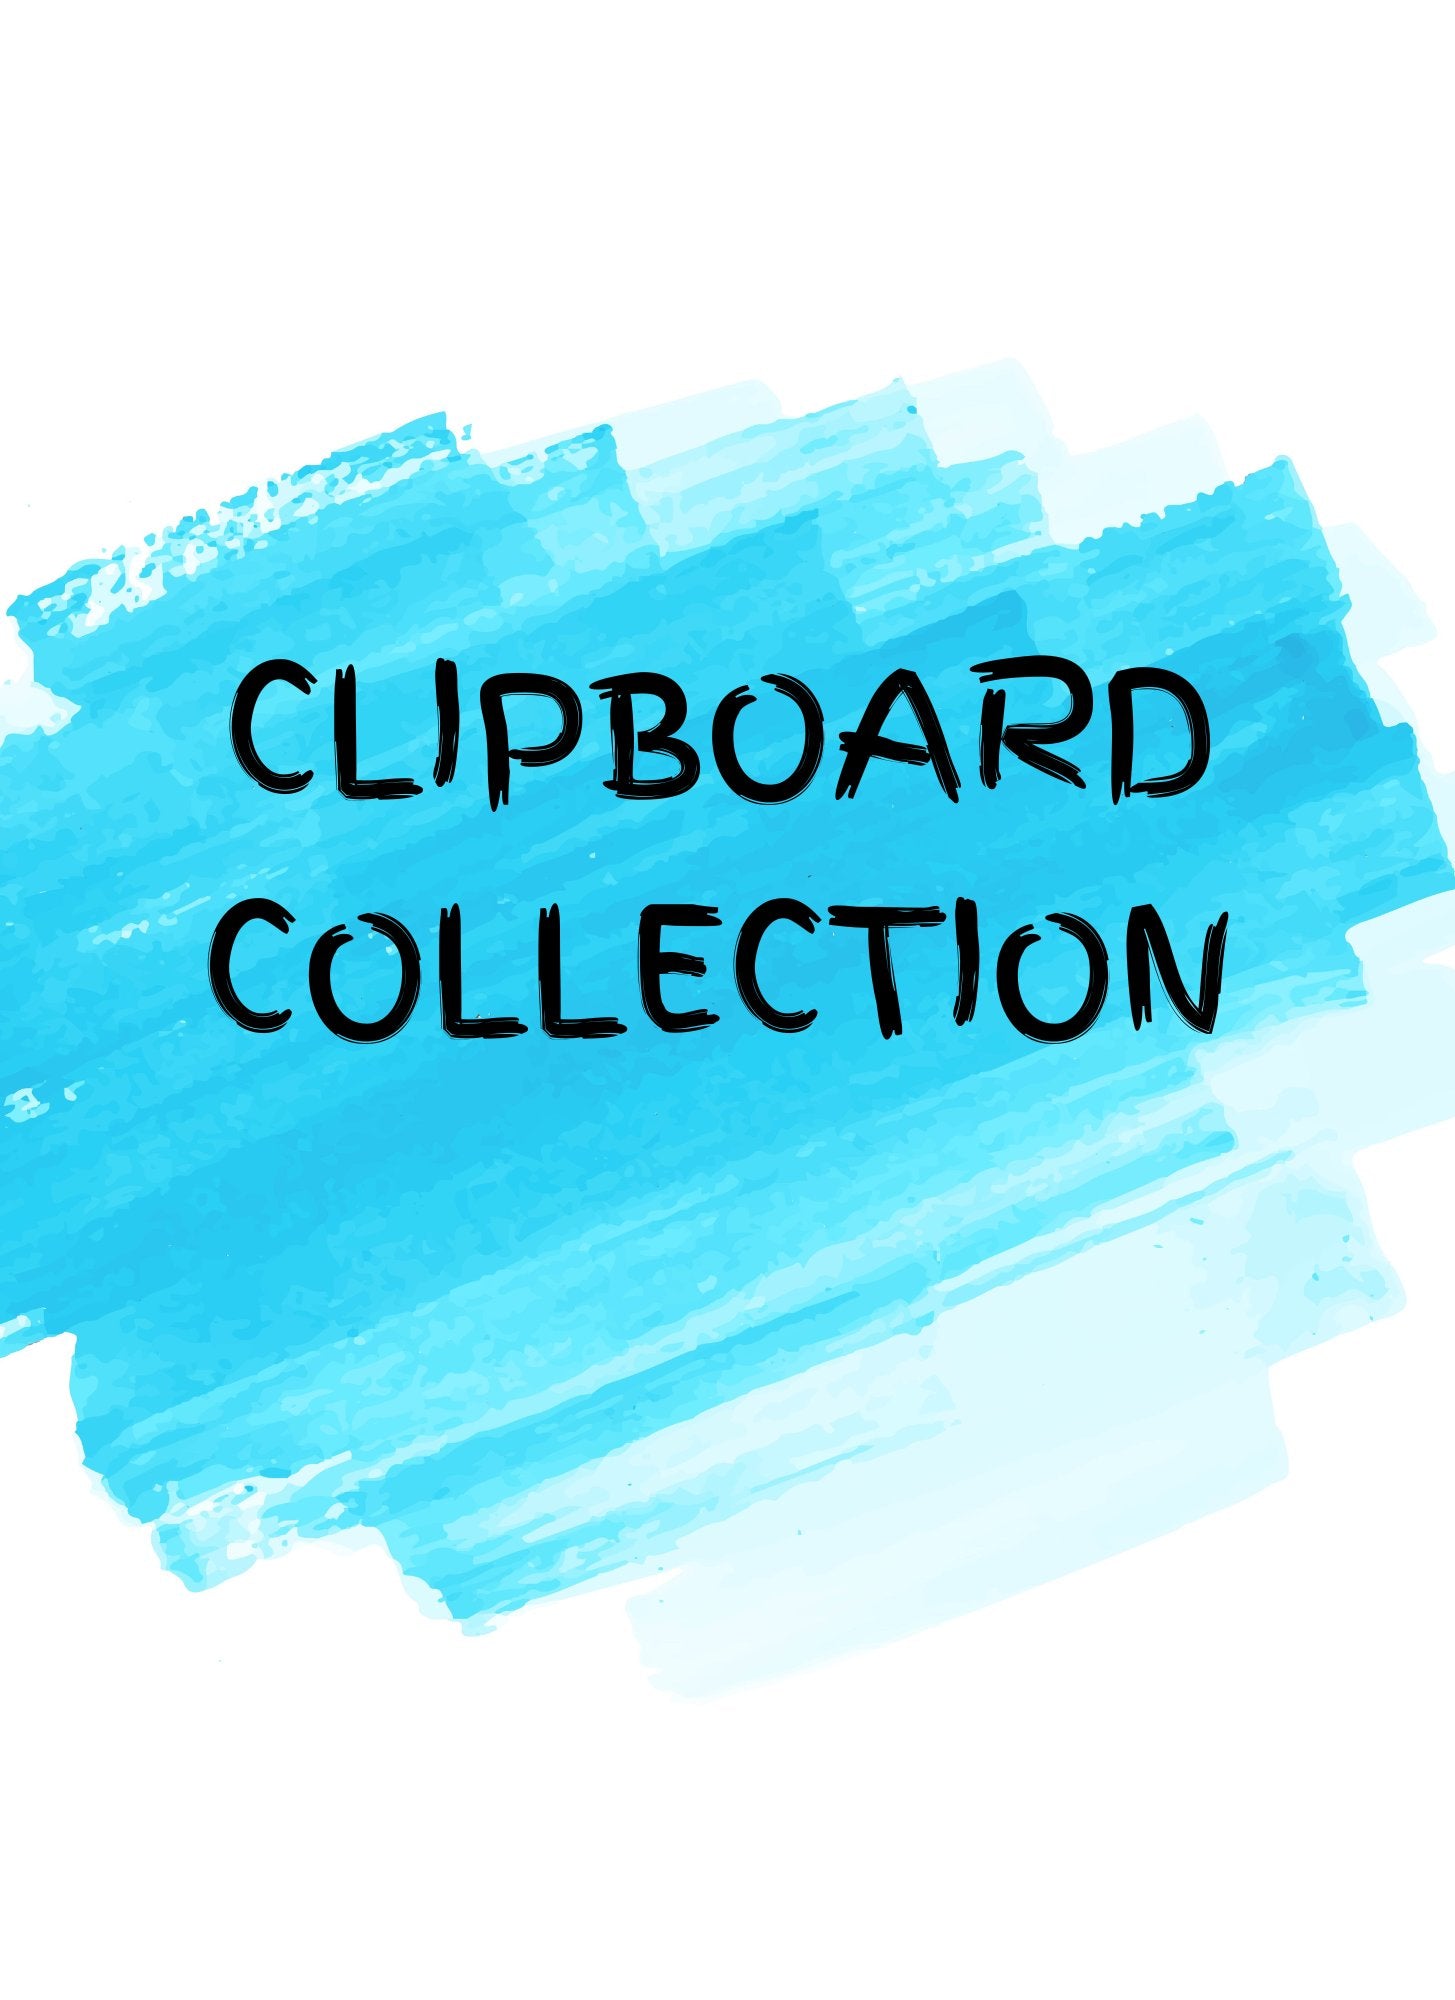 Clipboard Collection